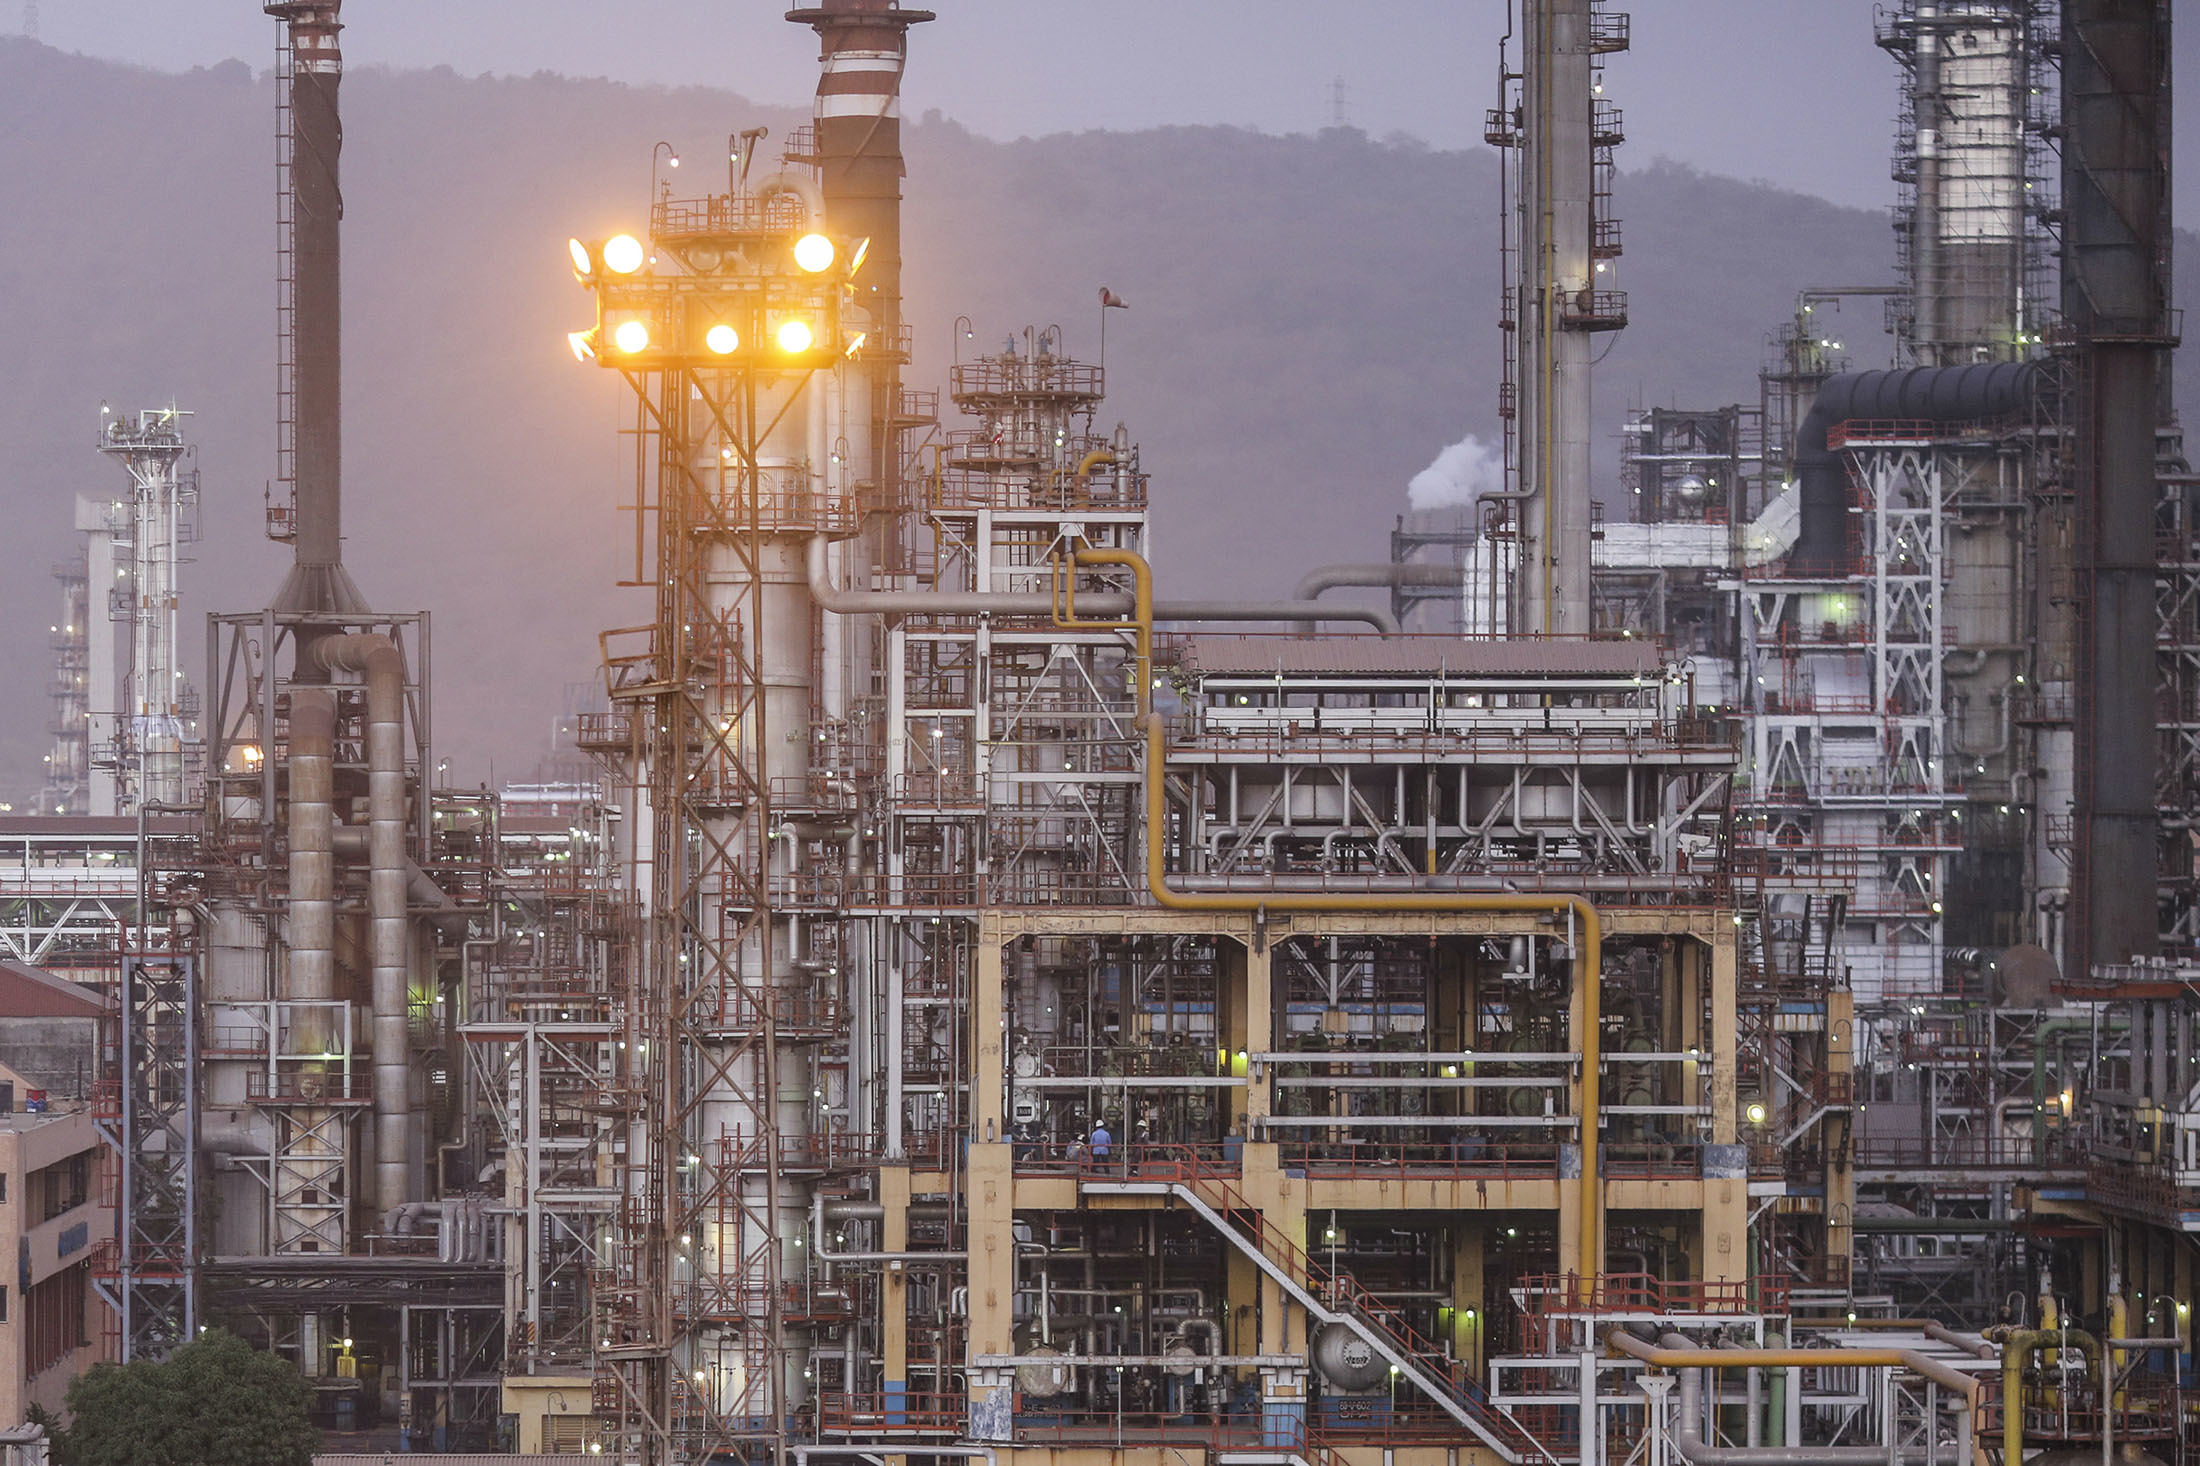 A Bharat Petroleum Corp. refinery stands in the Mahul area of Mumbai, India. Photographer: Dhiraj Singh/Bloomberg